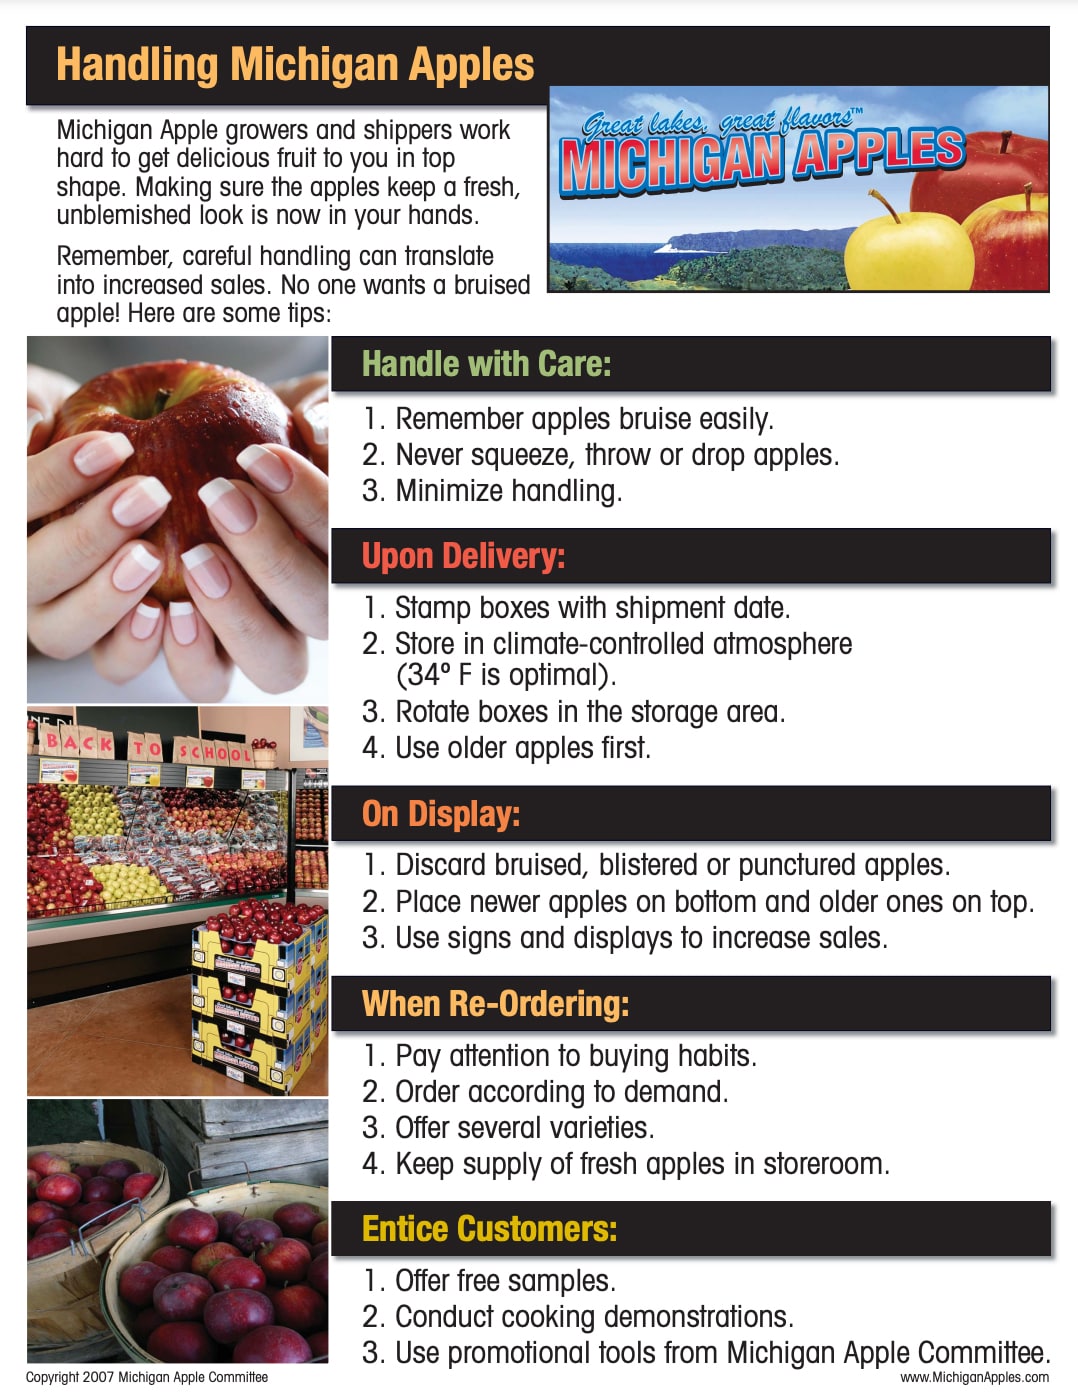 Michigan Apple Handling Care Tips for Retailers